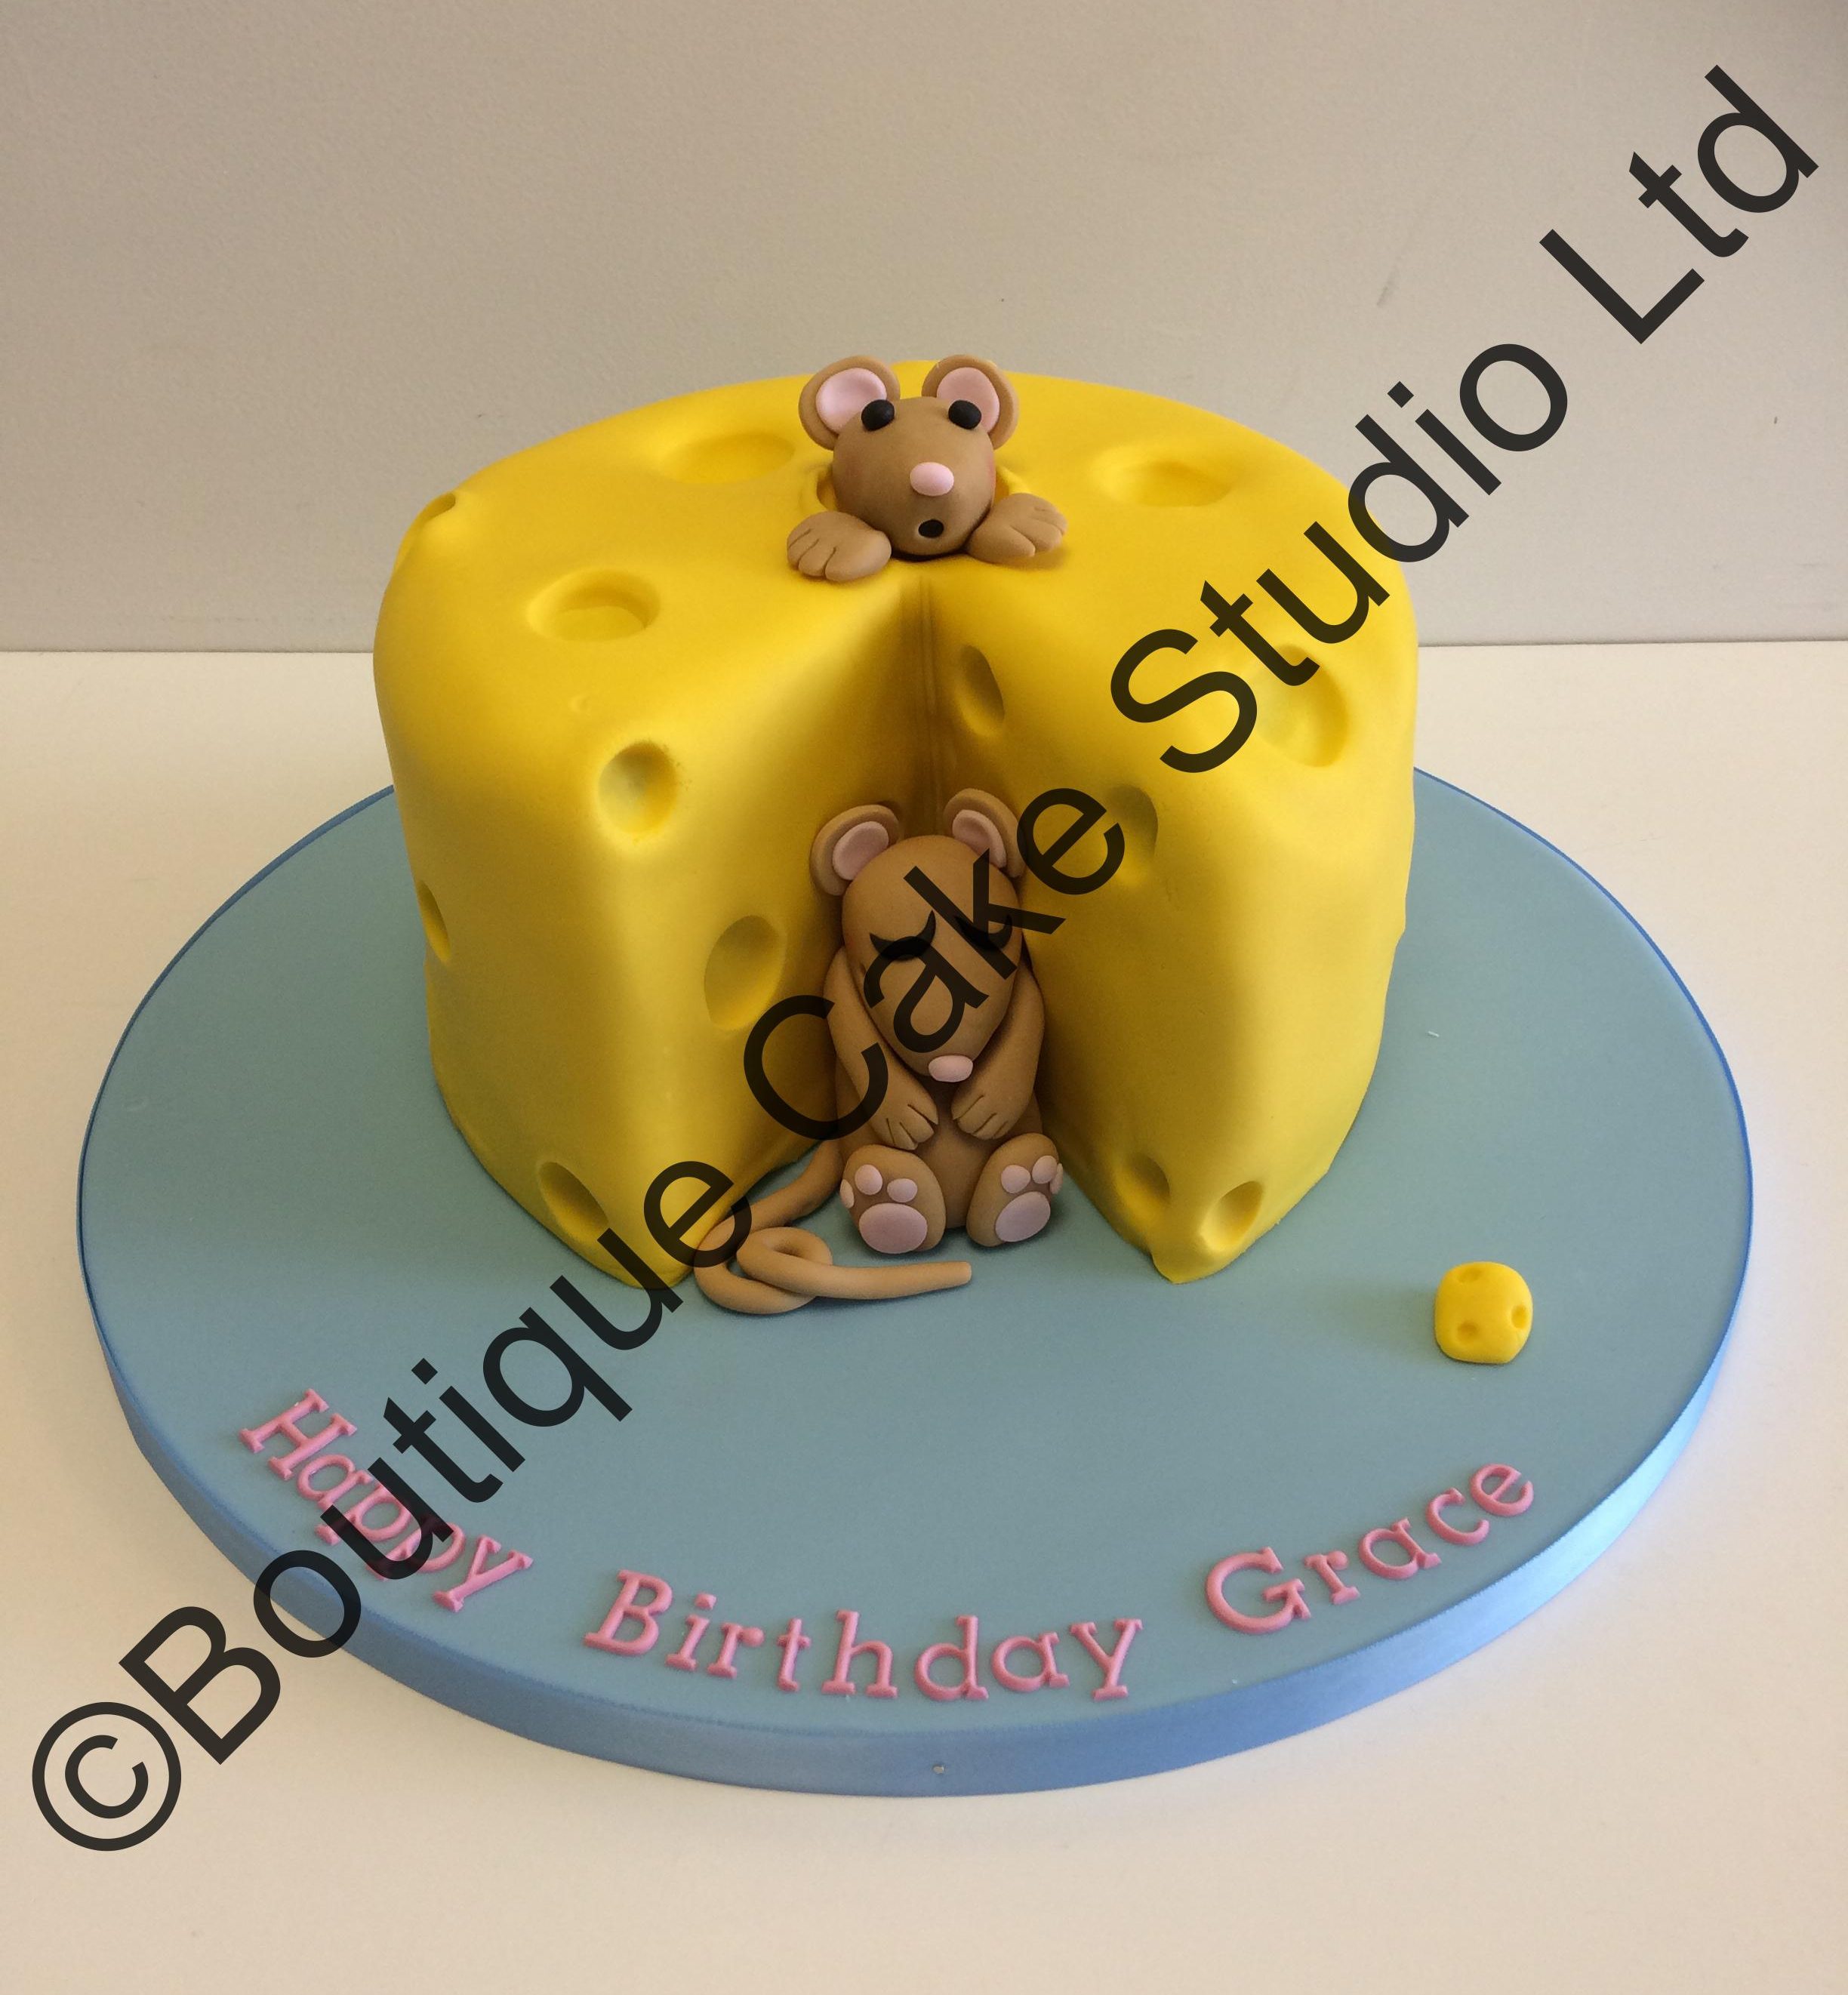 Cheese with mice Cake